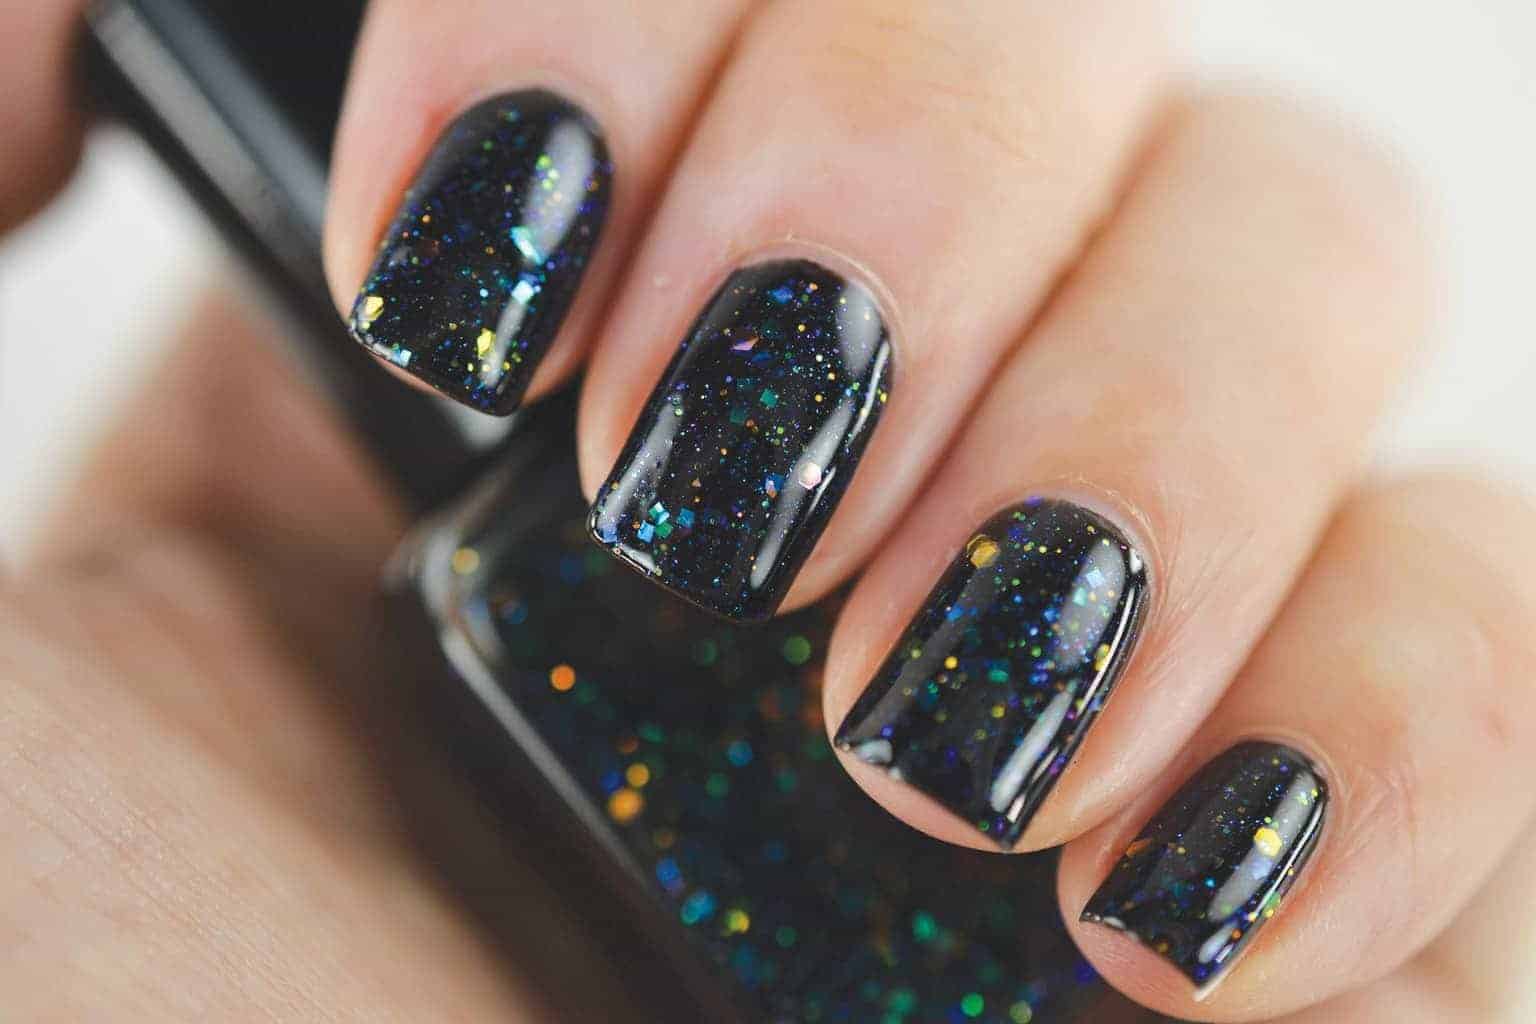 How To Do The Amazing Galaxy Nail Designs: 10 Simple Steps